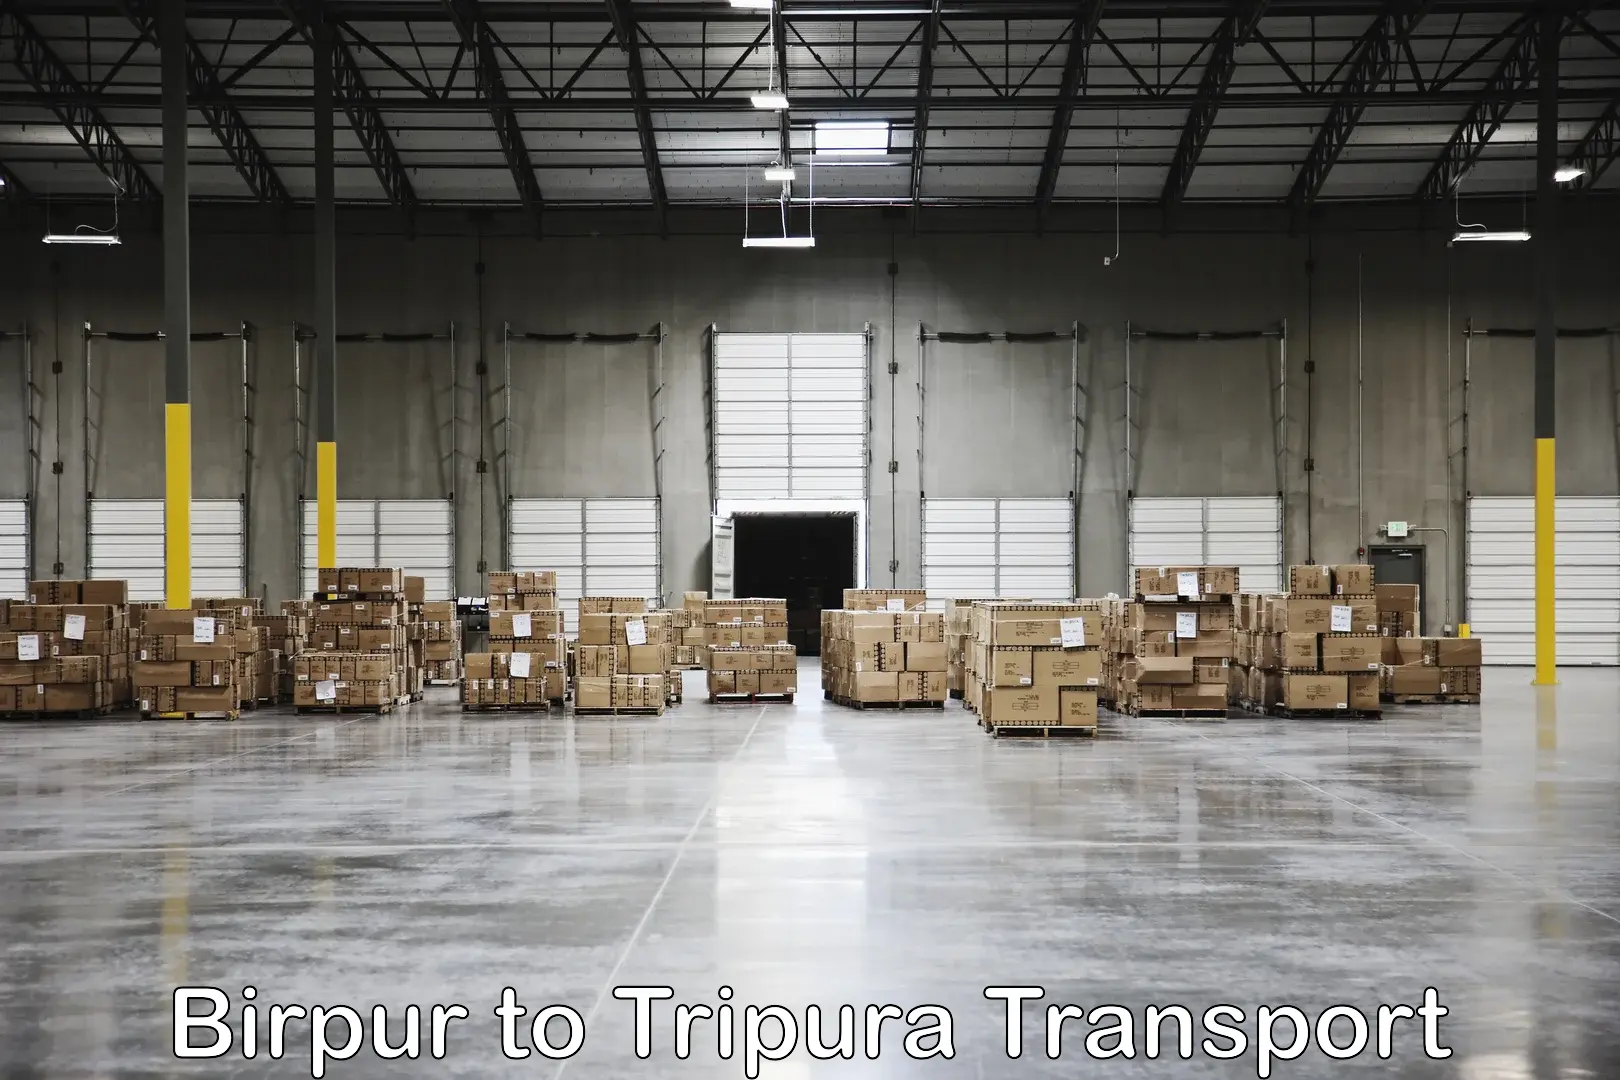 Daily transport service in Birpur to Tripura